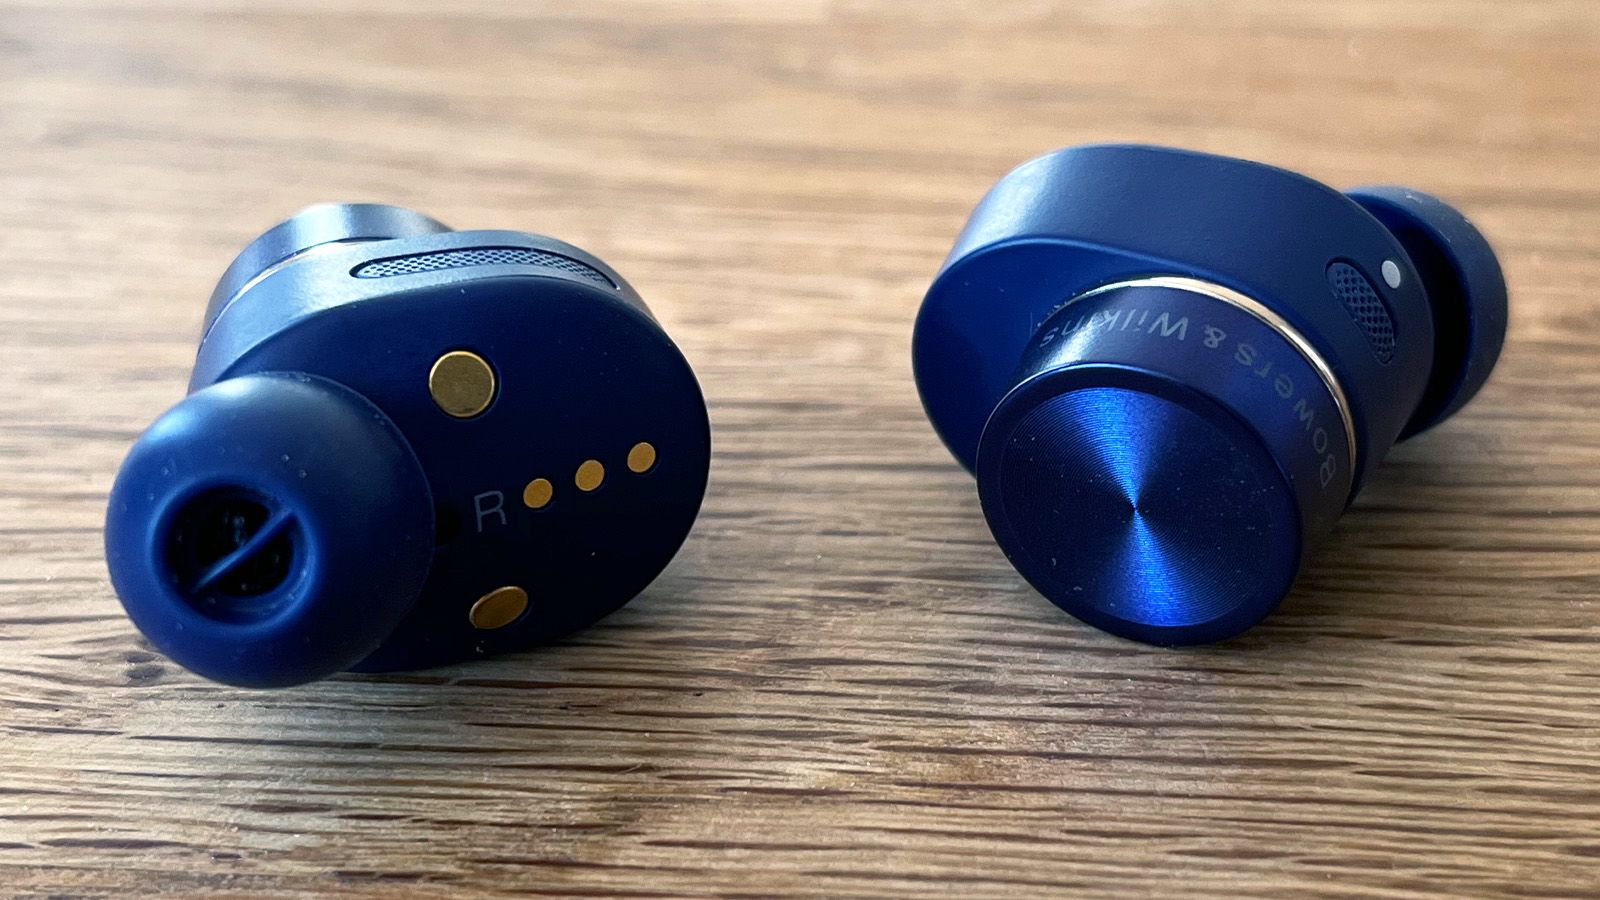 Bowers & Wilkins PI7 S2 Earbuds Review: Same Fantastic Sound, But